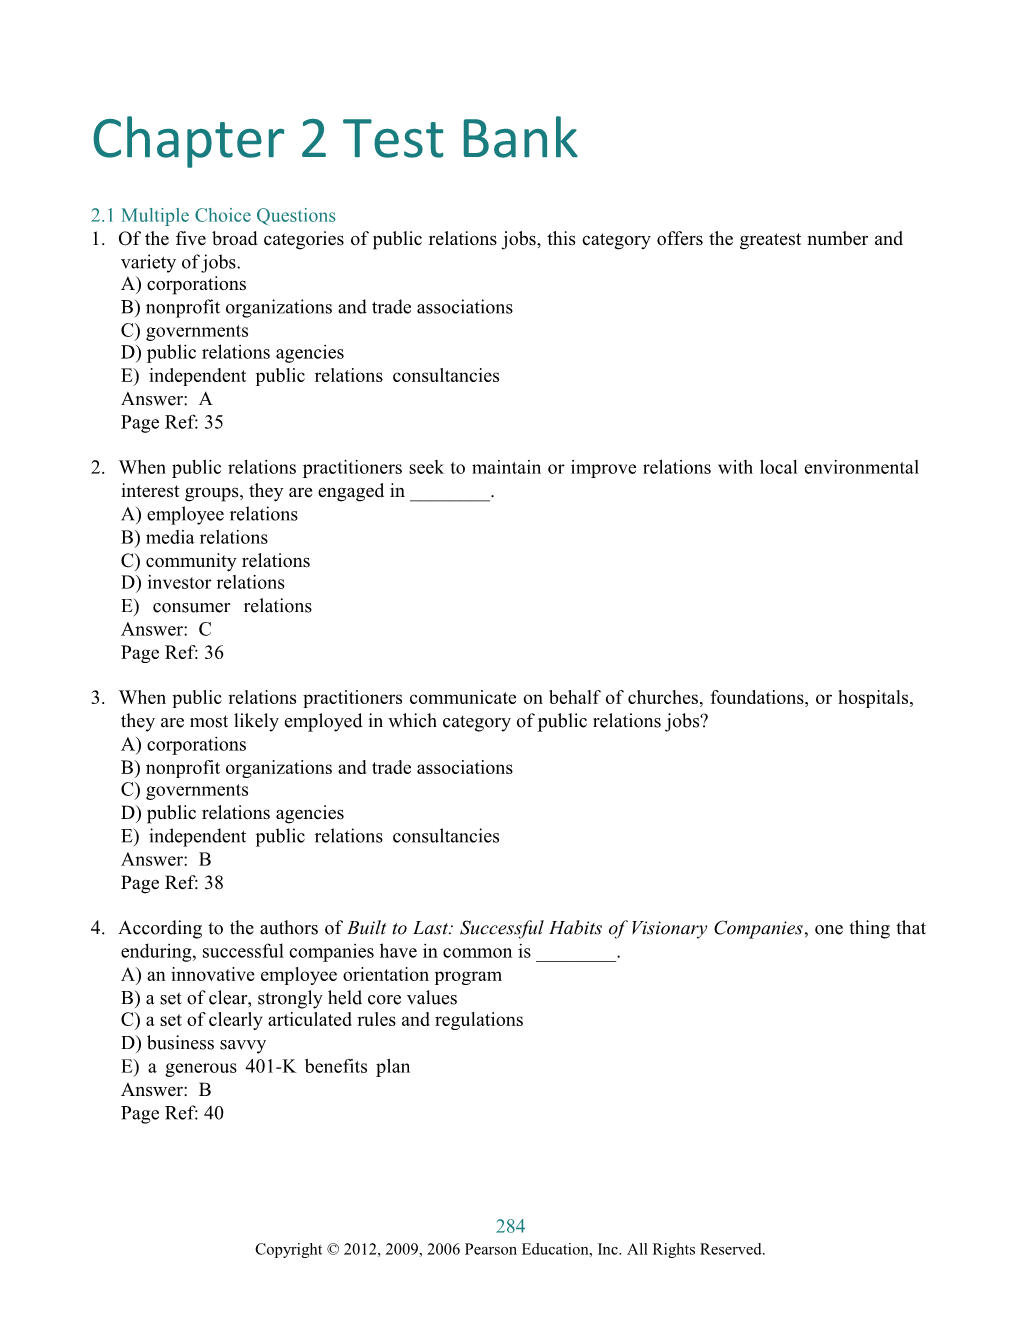 Chapter 2 Test Bank s1